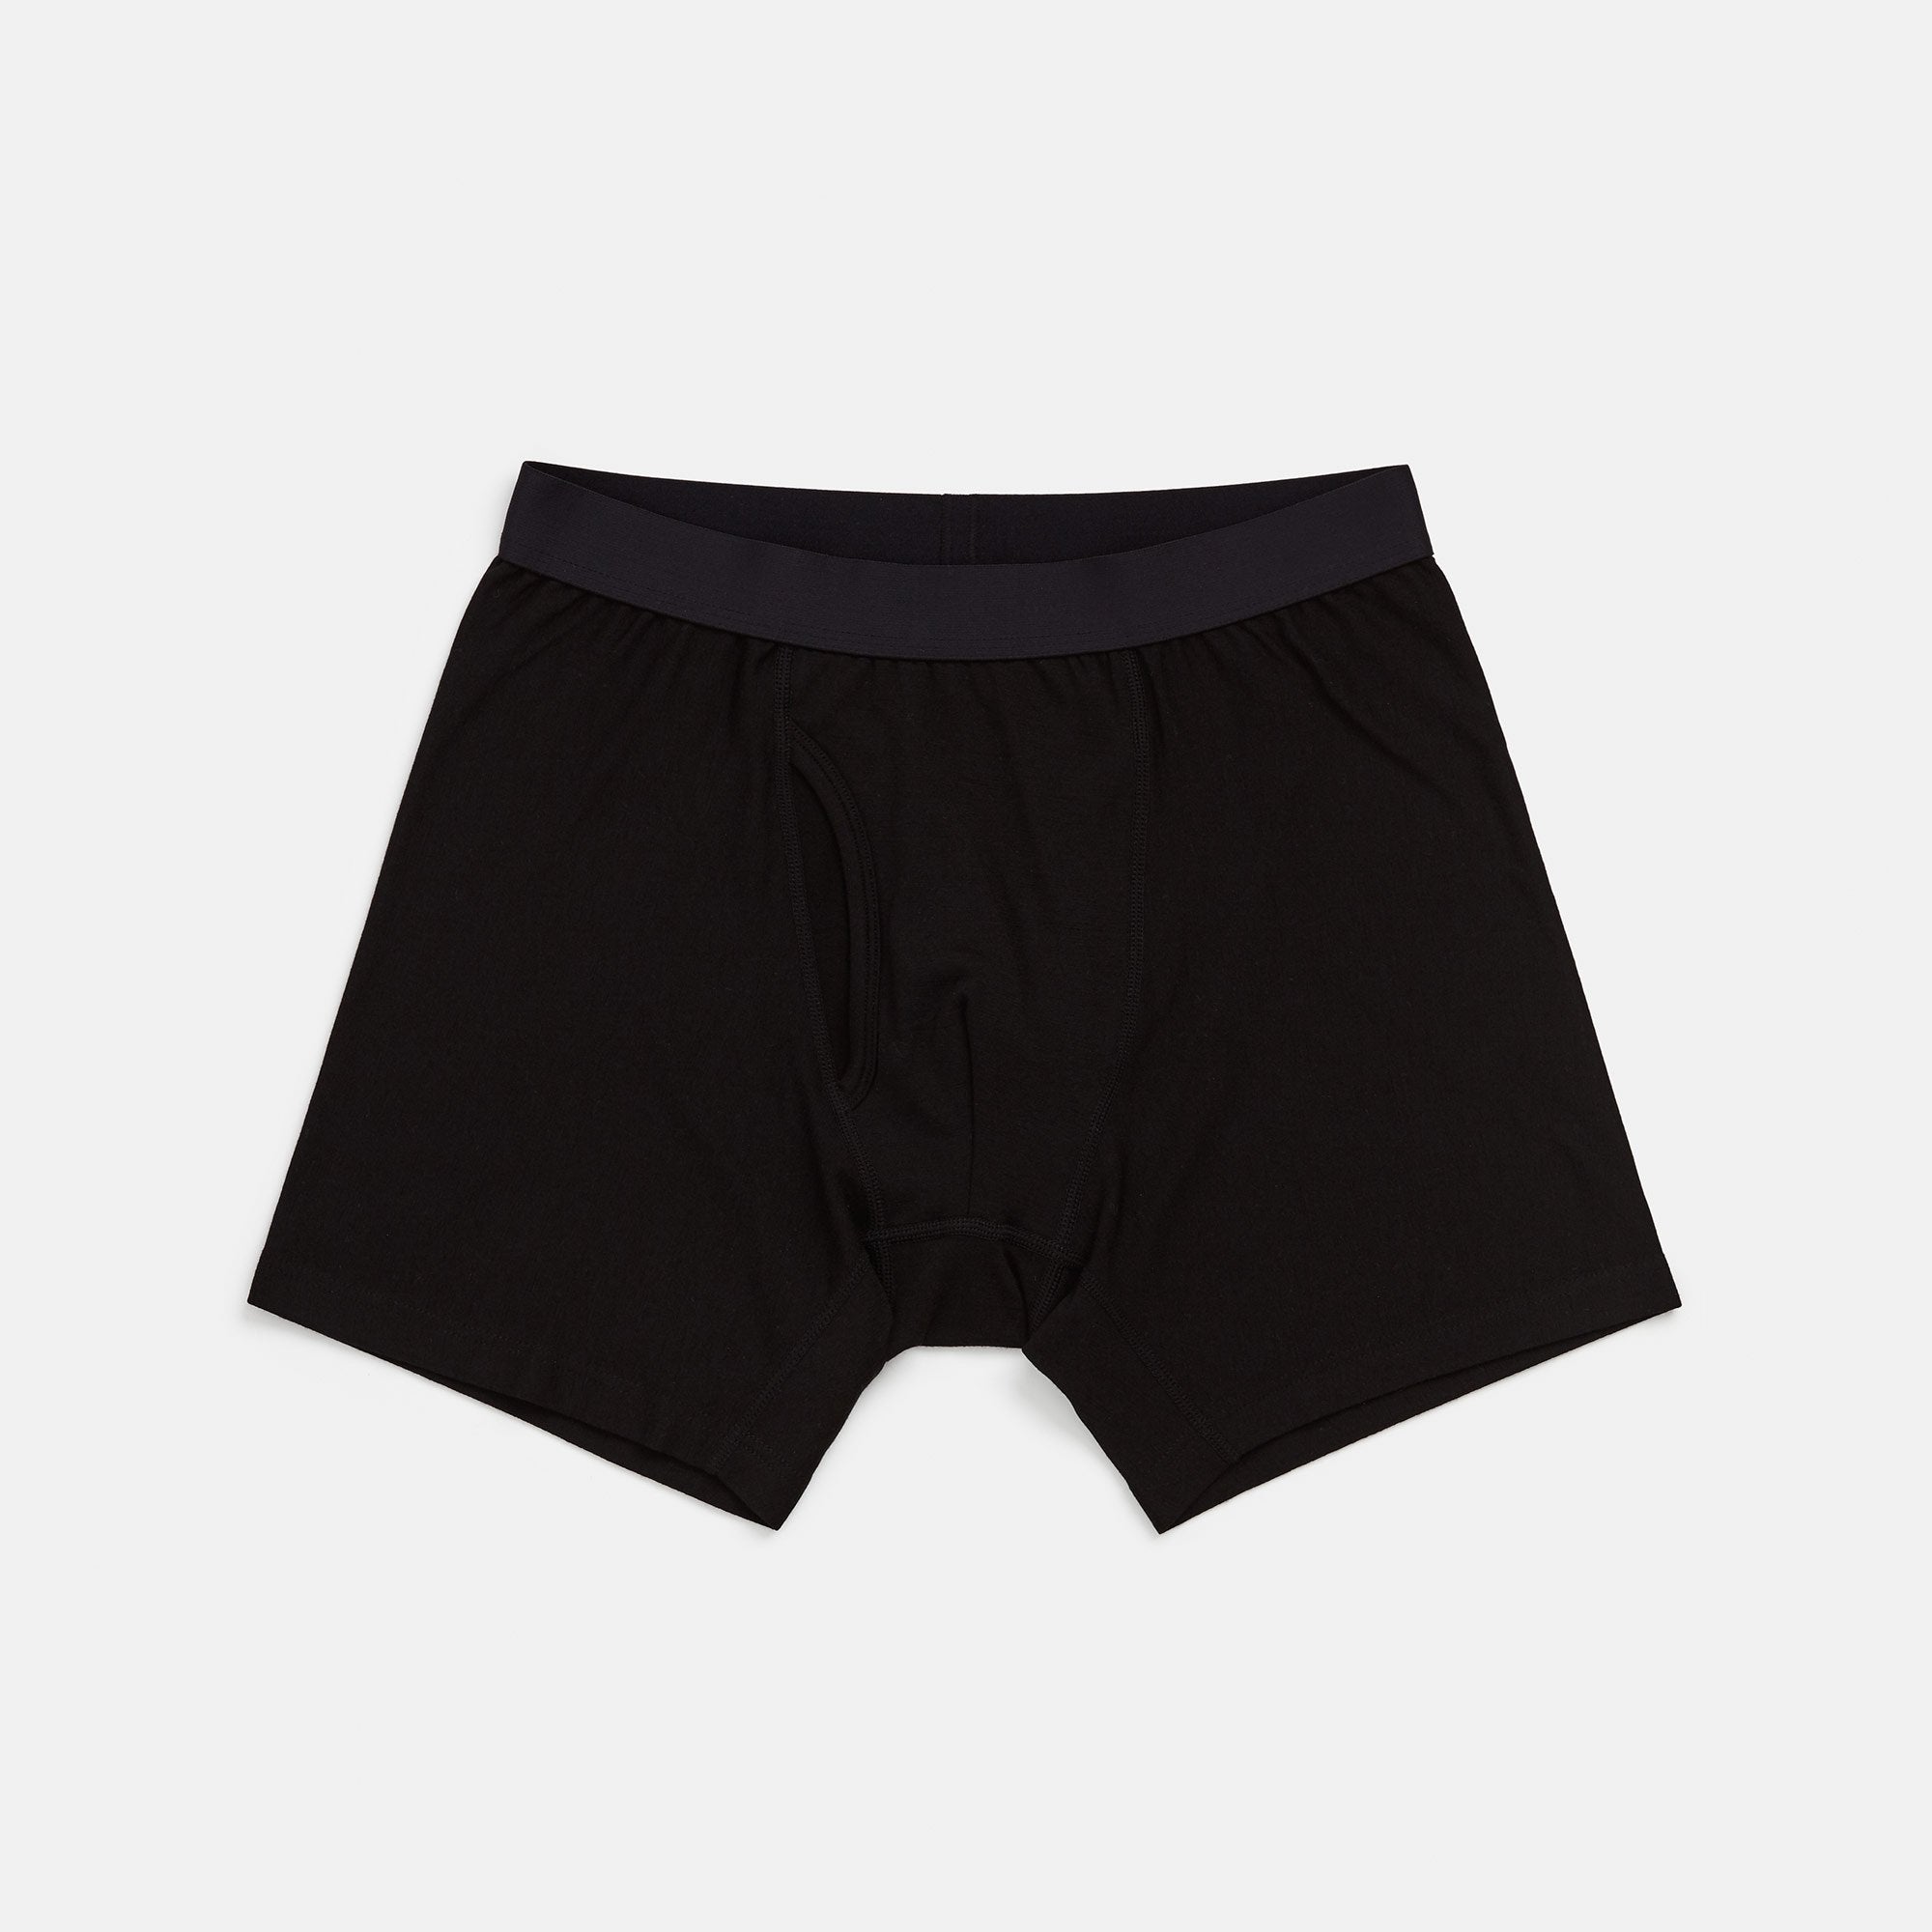 $10 for 5 pairs of boxer briefs is a great deal, but beware that